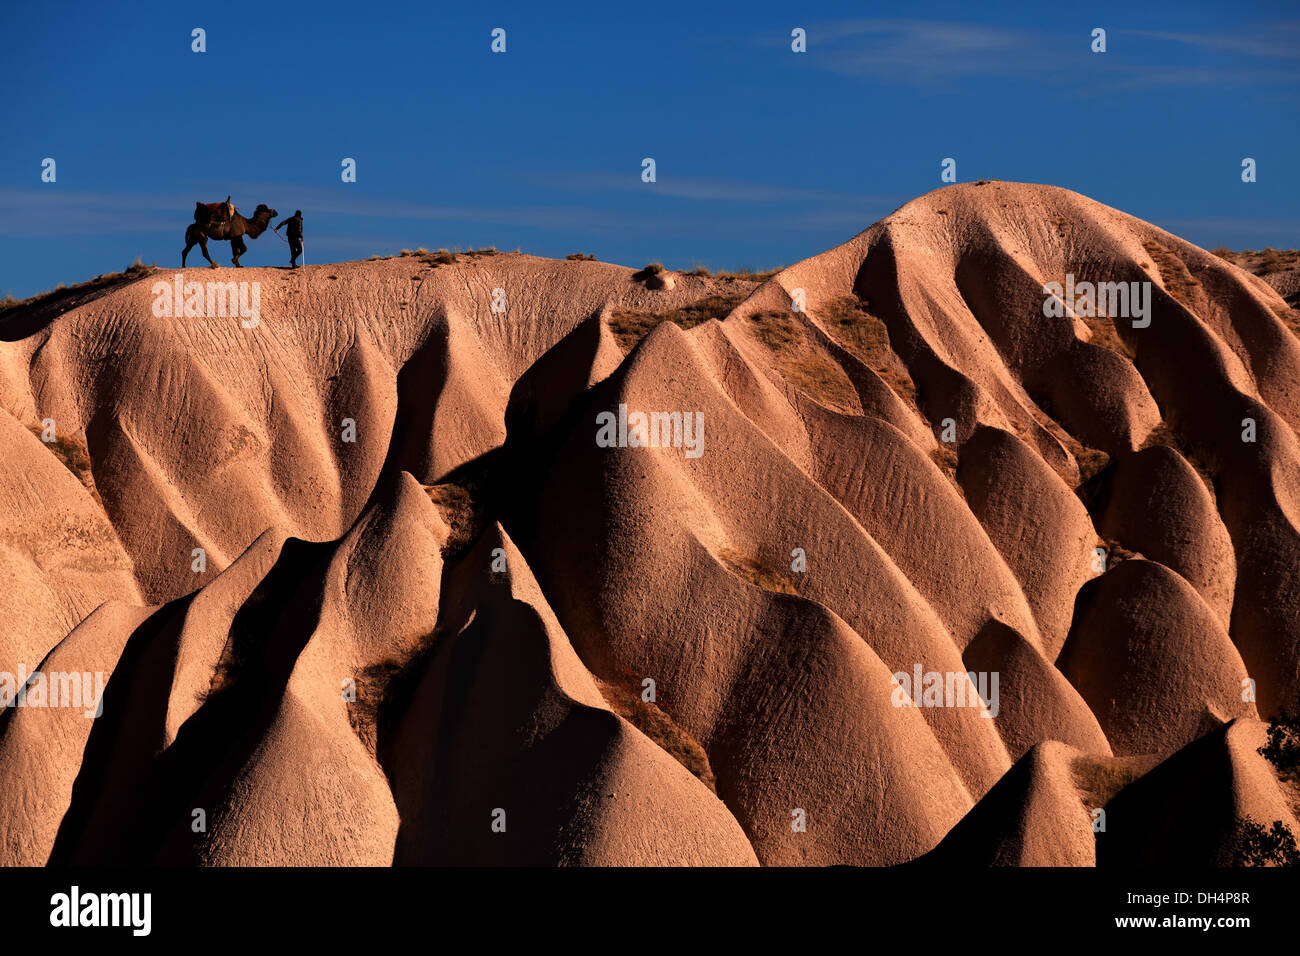 Cappadocia formations and the camel Stock Photo